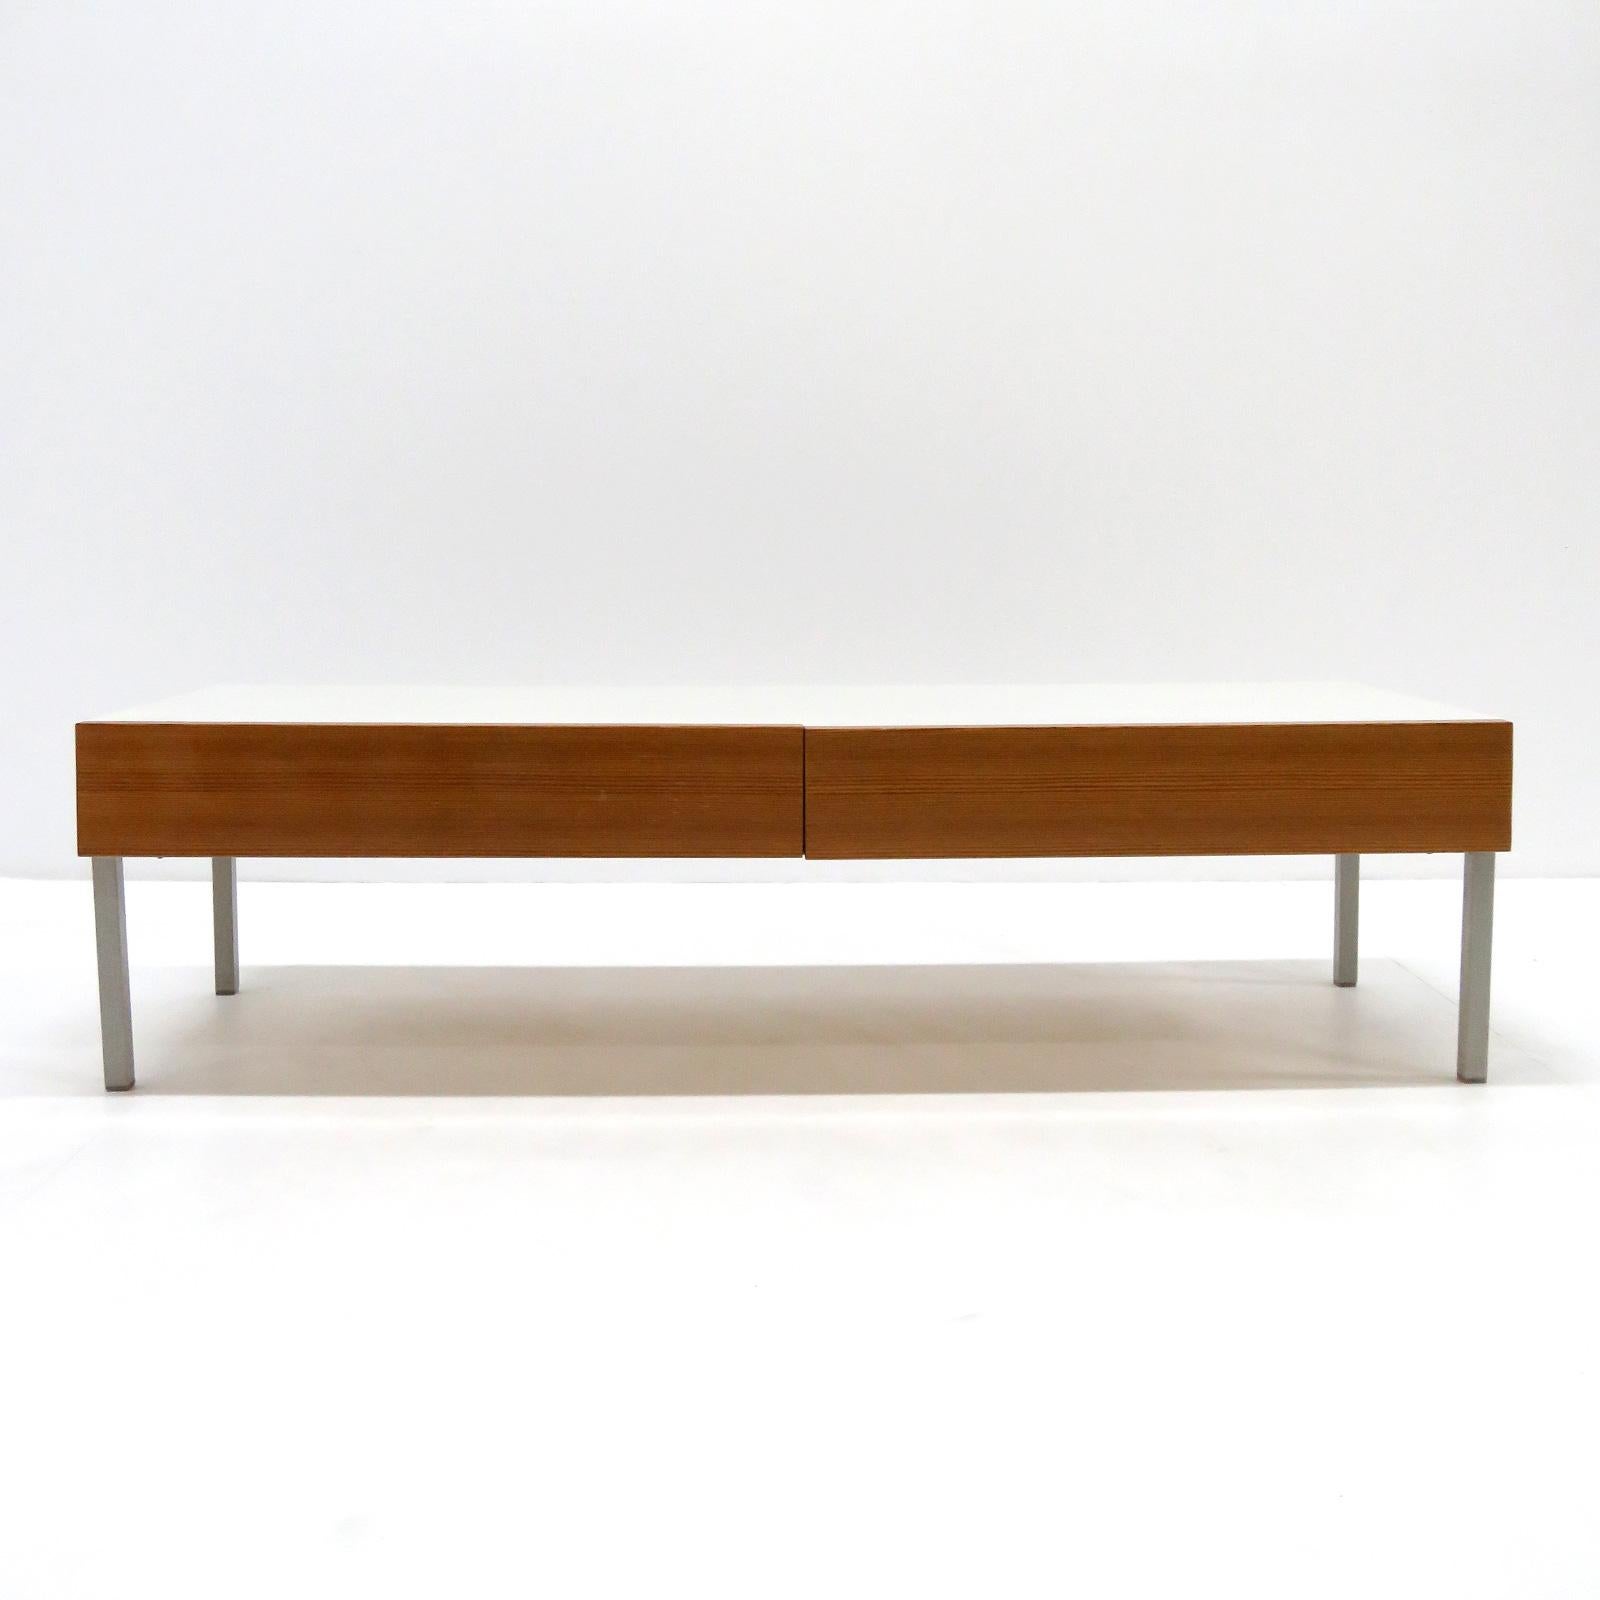 Late 20th Century Set of Sideboards by Interlübke, Germany, 1970